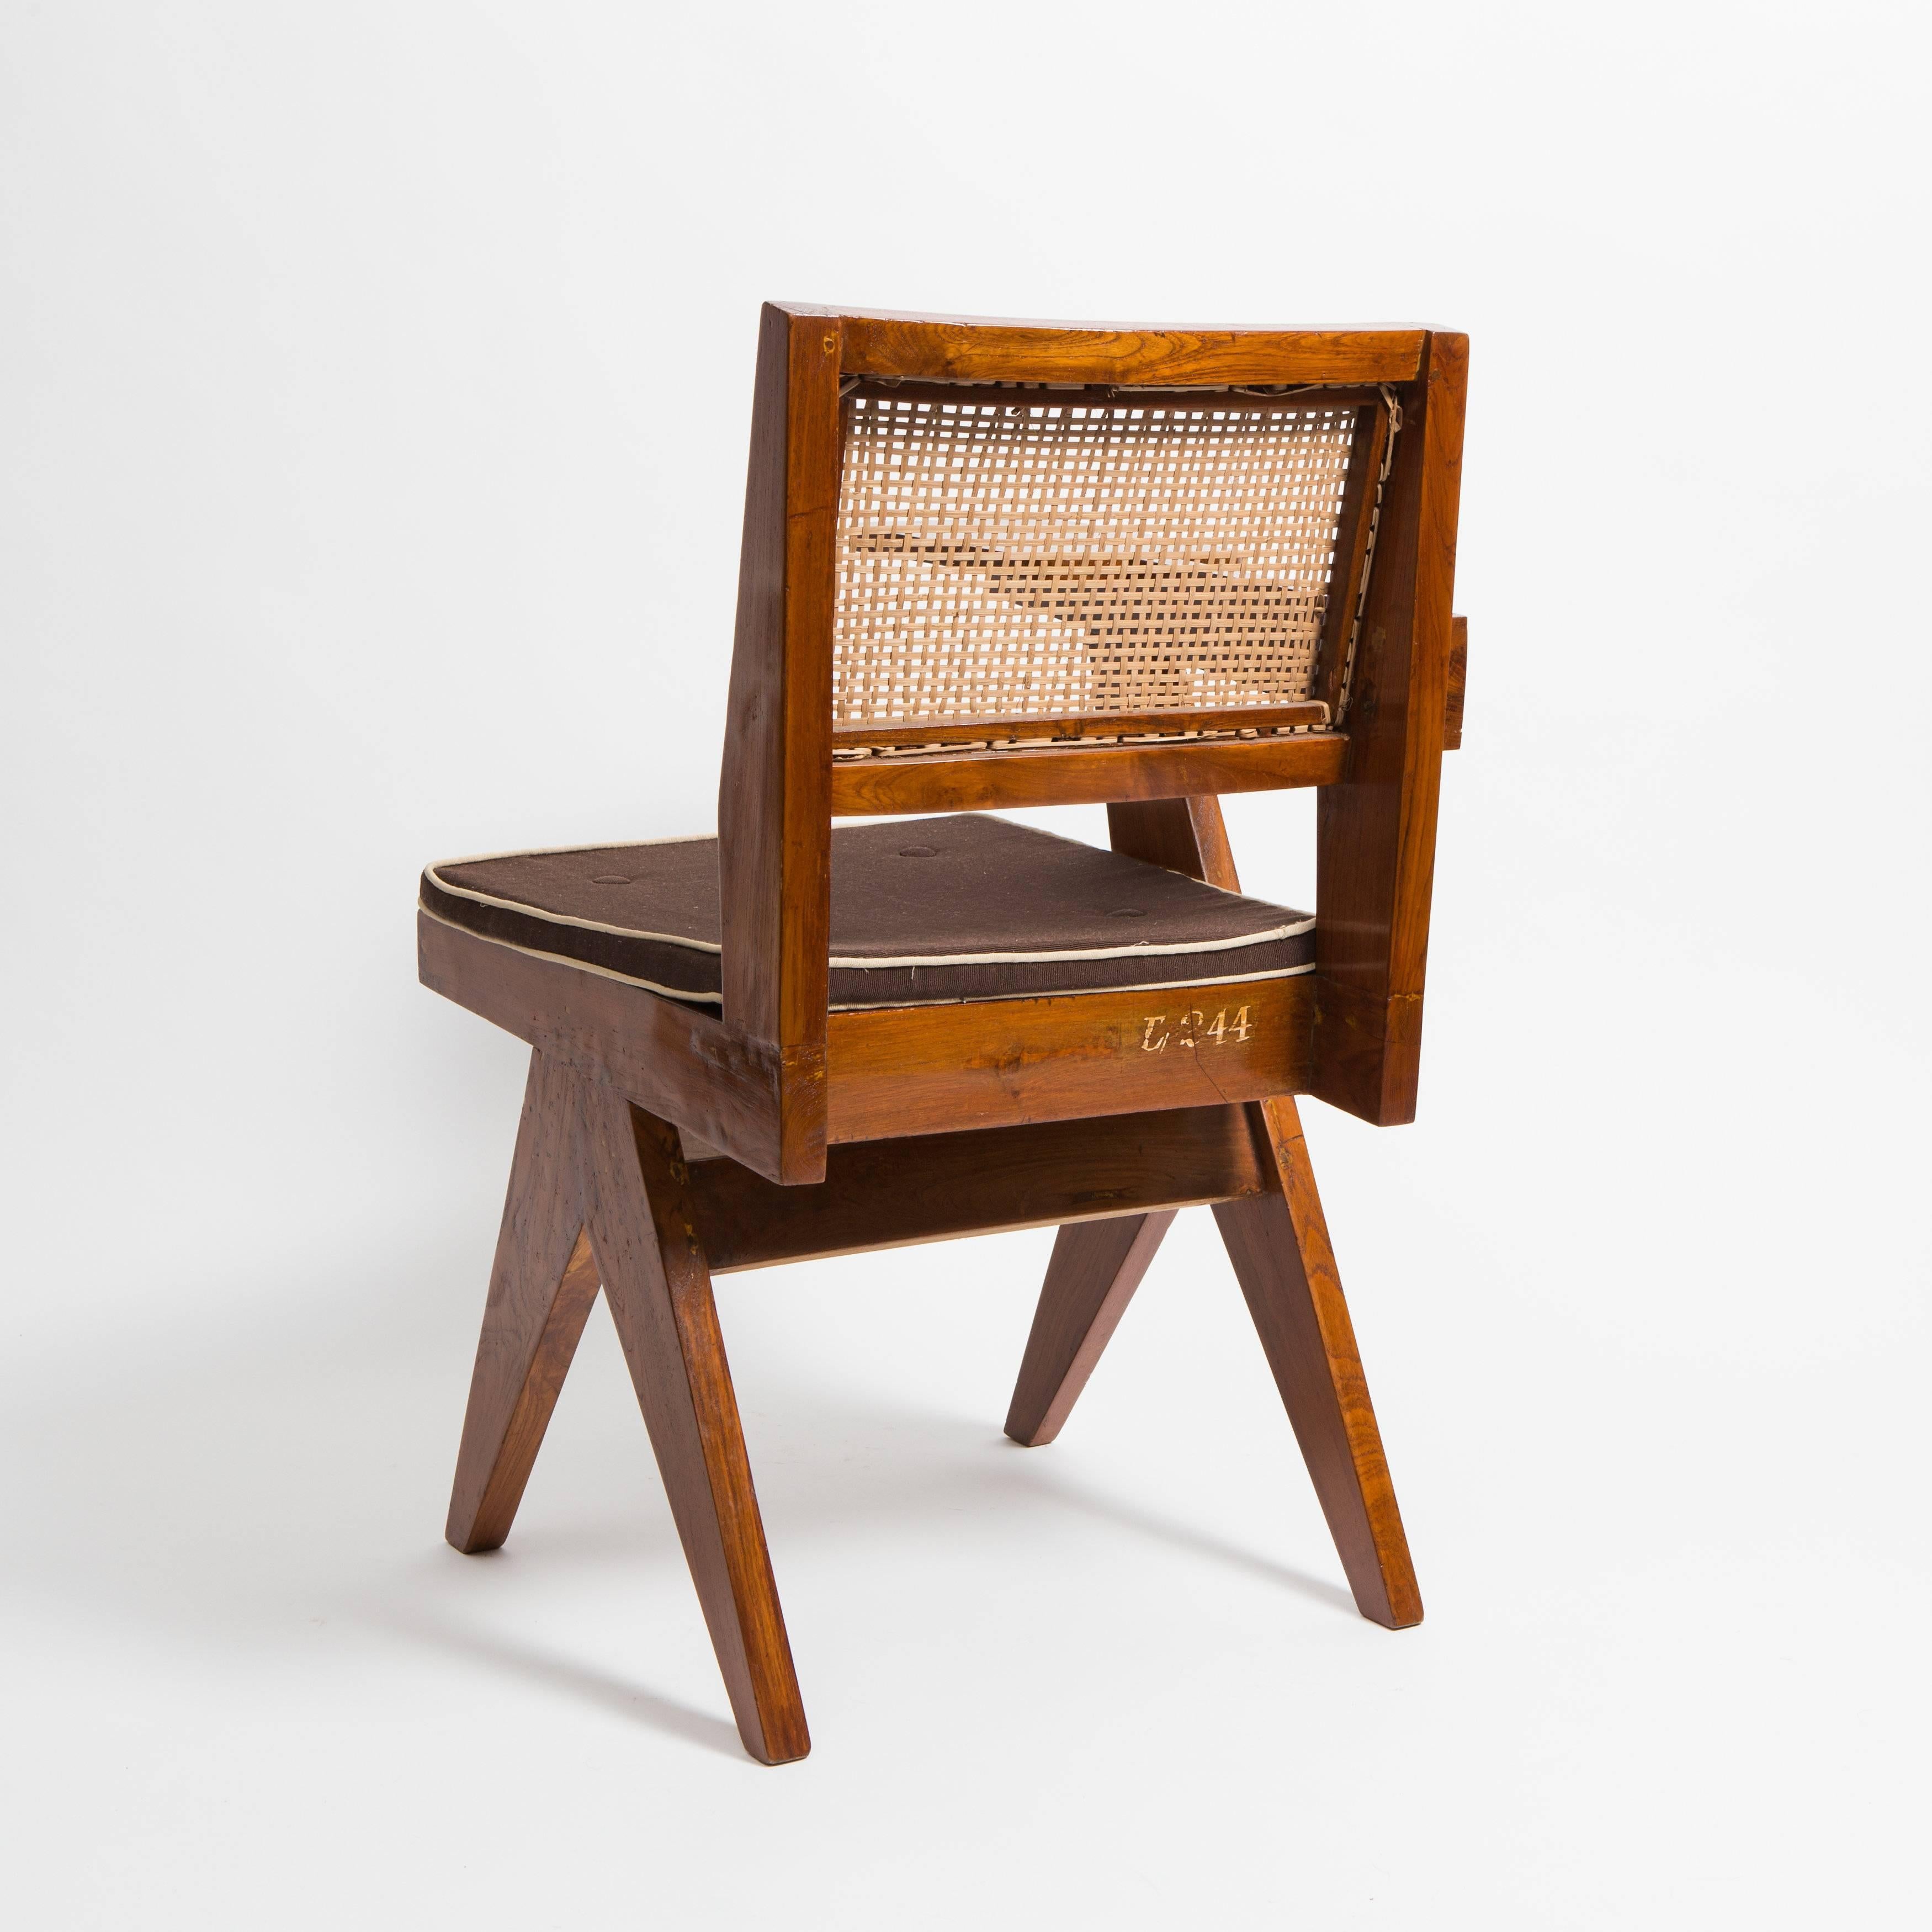 Mid-20th Century Desk Chair by Pierre Jeanneret for Punjab University